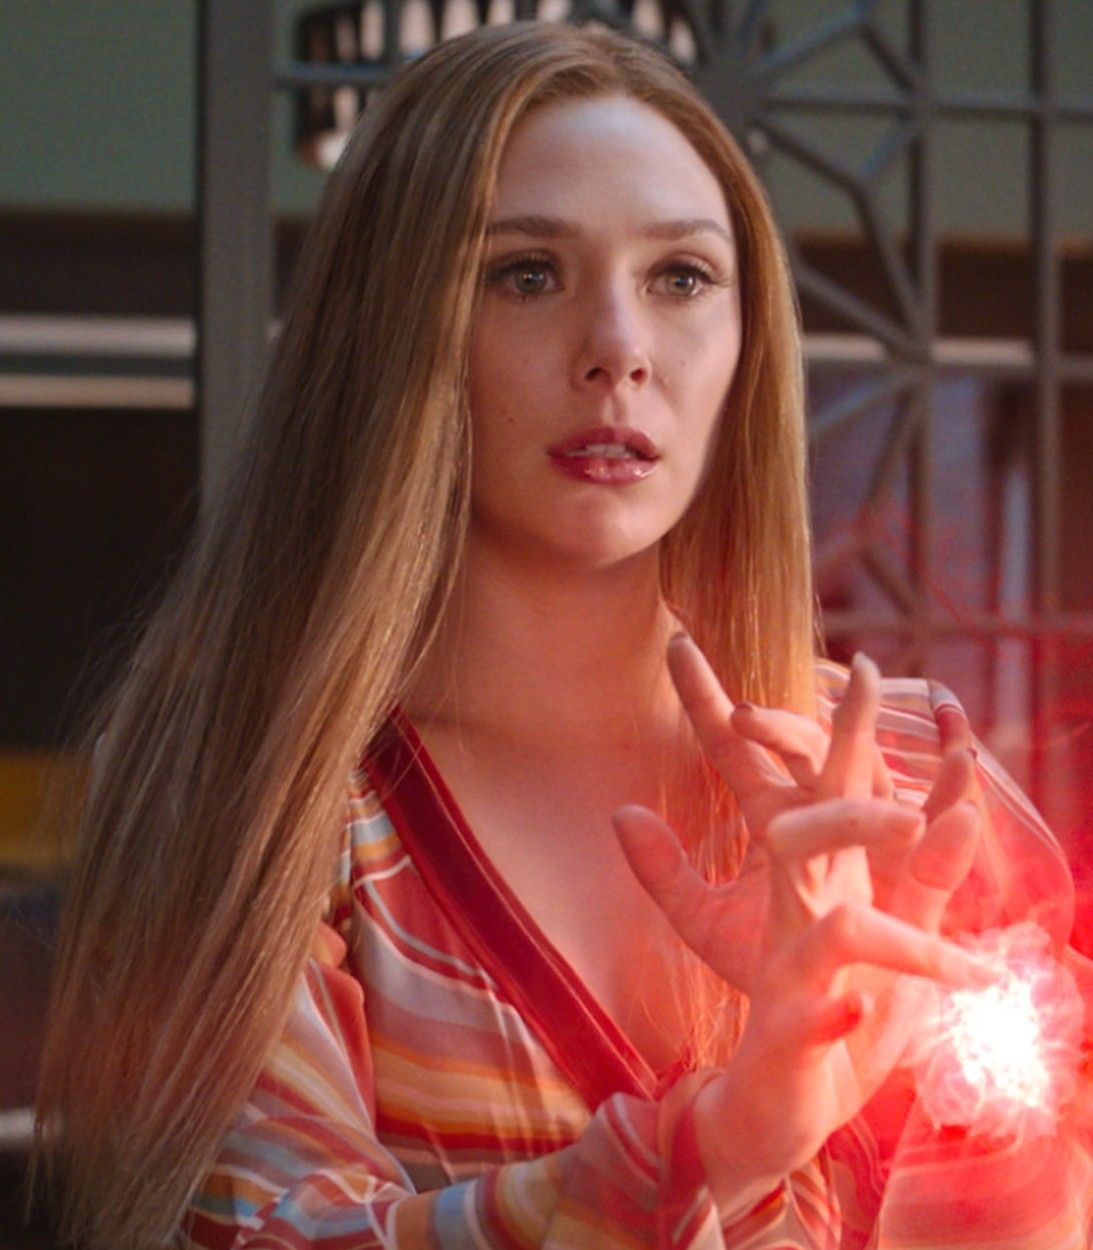 WandaVision Episode 4 Scarlet Witch Powers Vertical